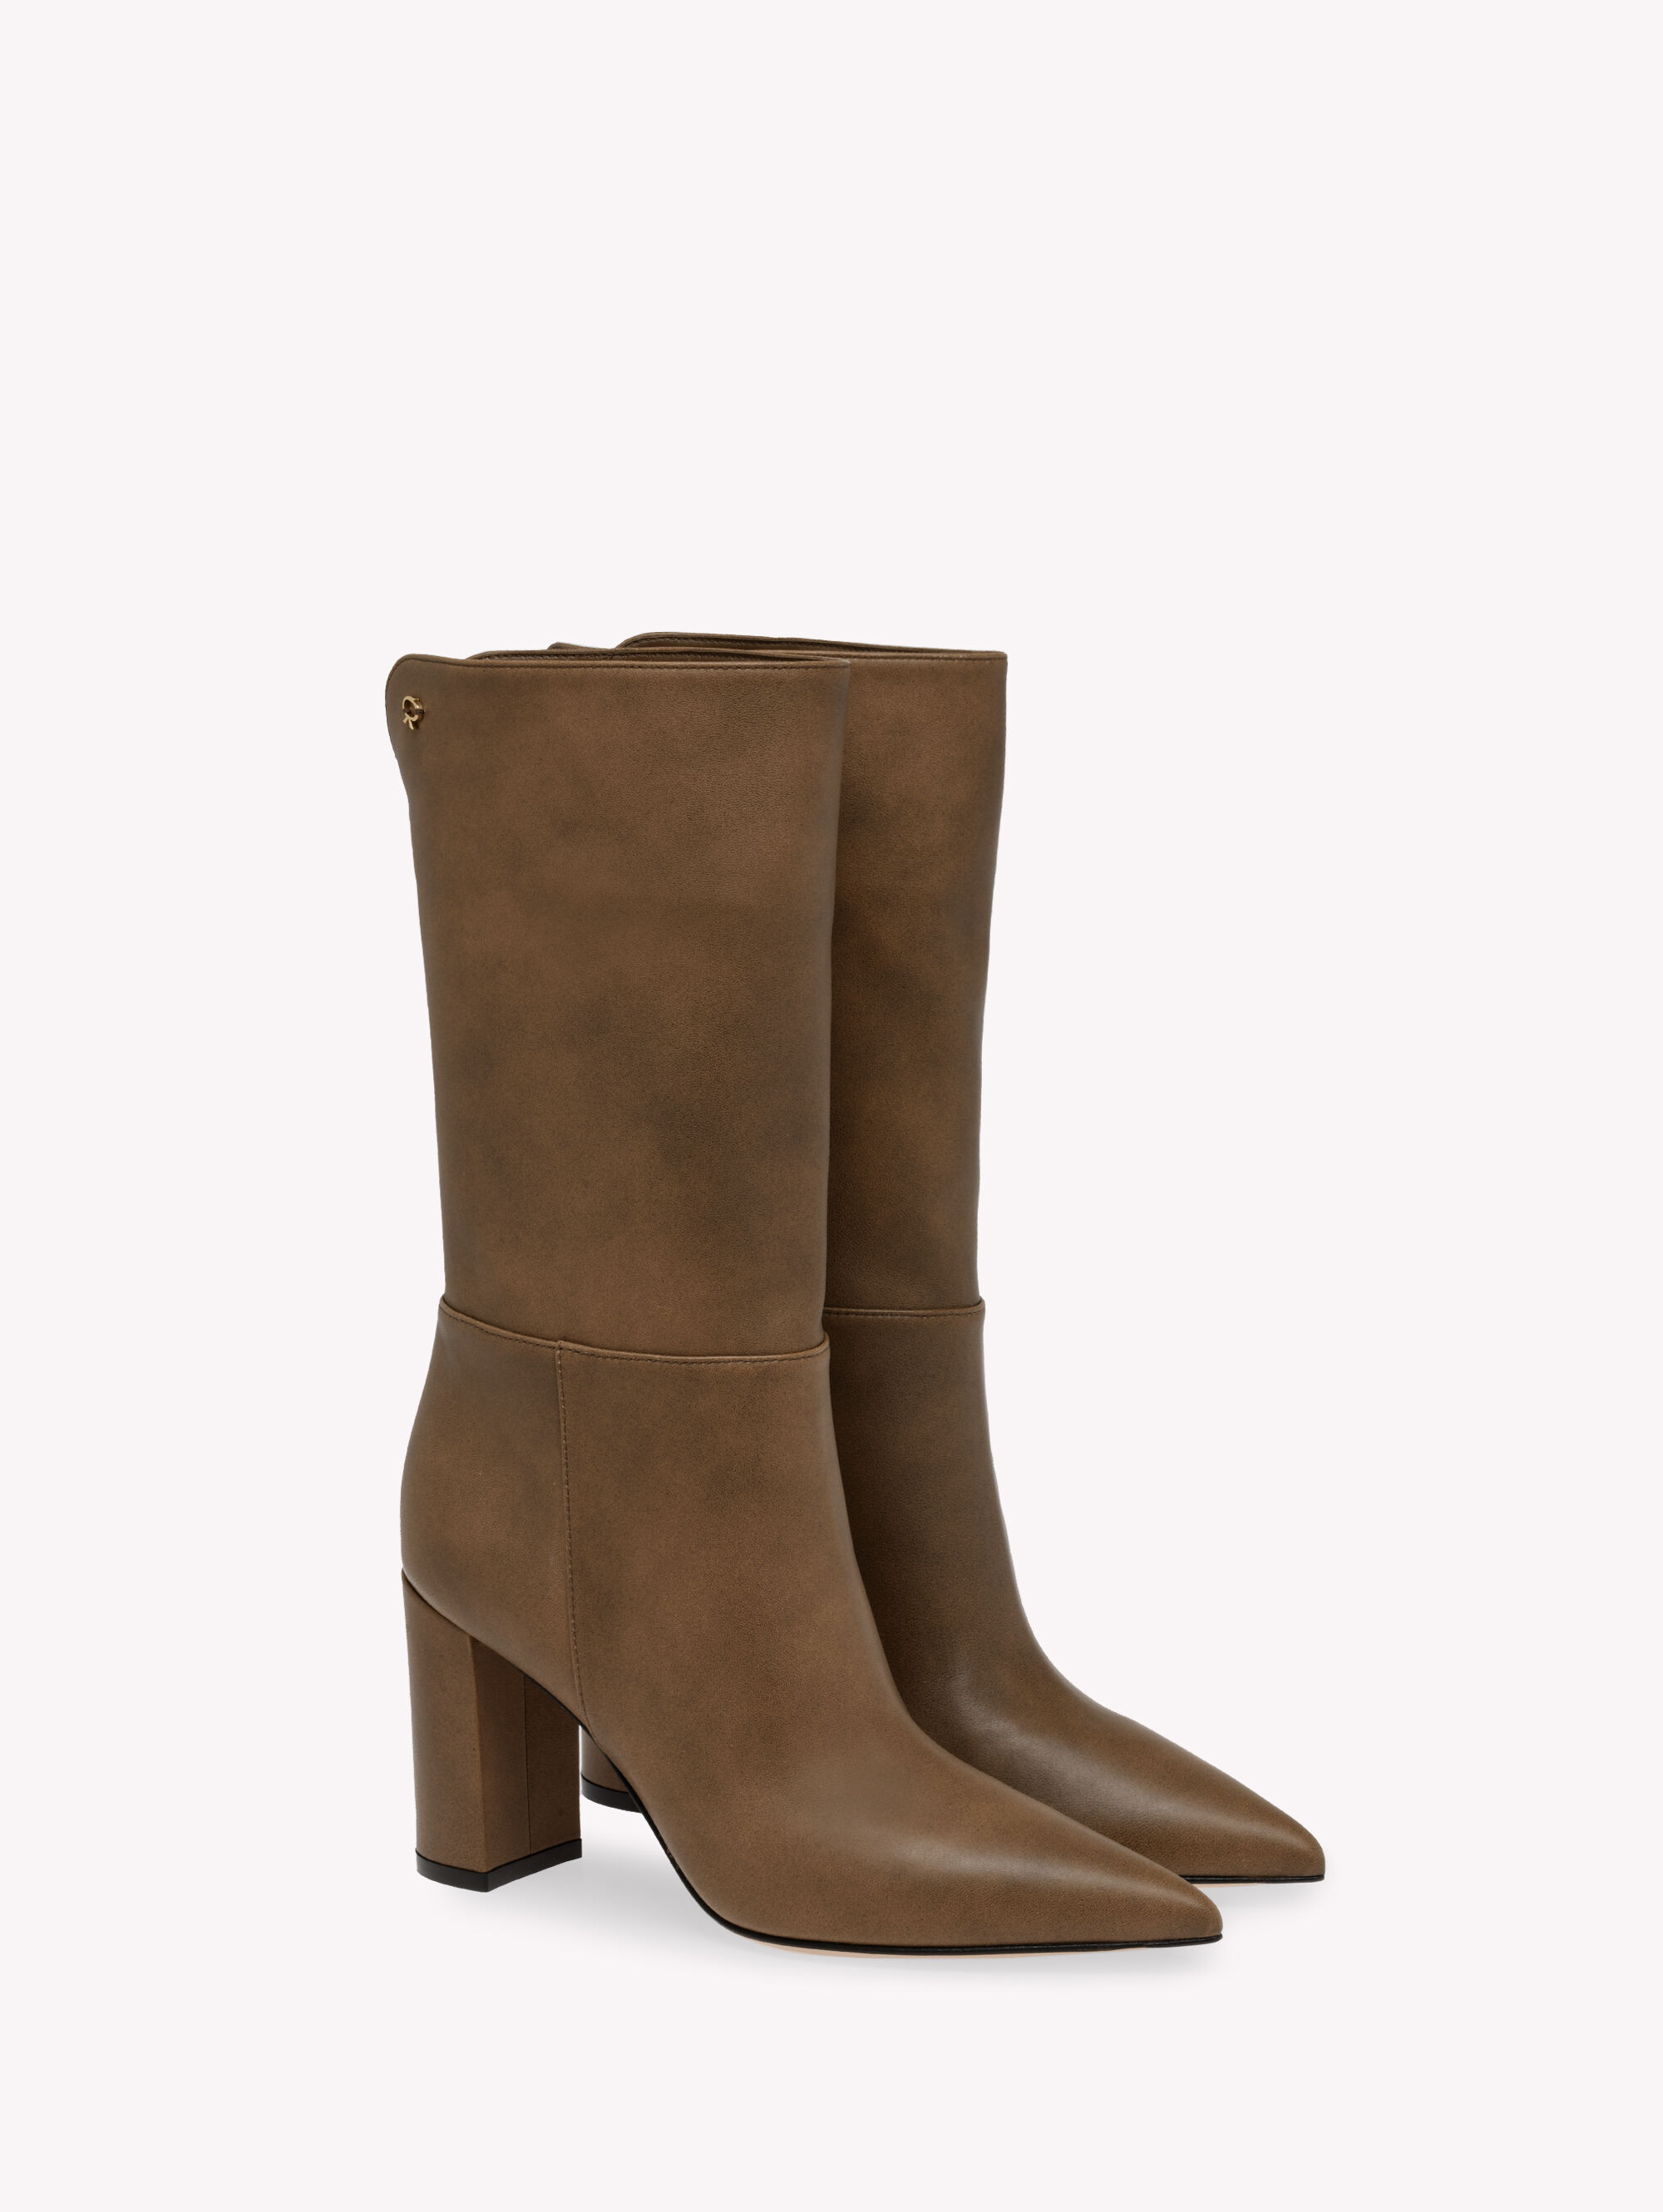 Ankle Boots for Women PIPER BOOTIE 85 | Gianvito Rossi